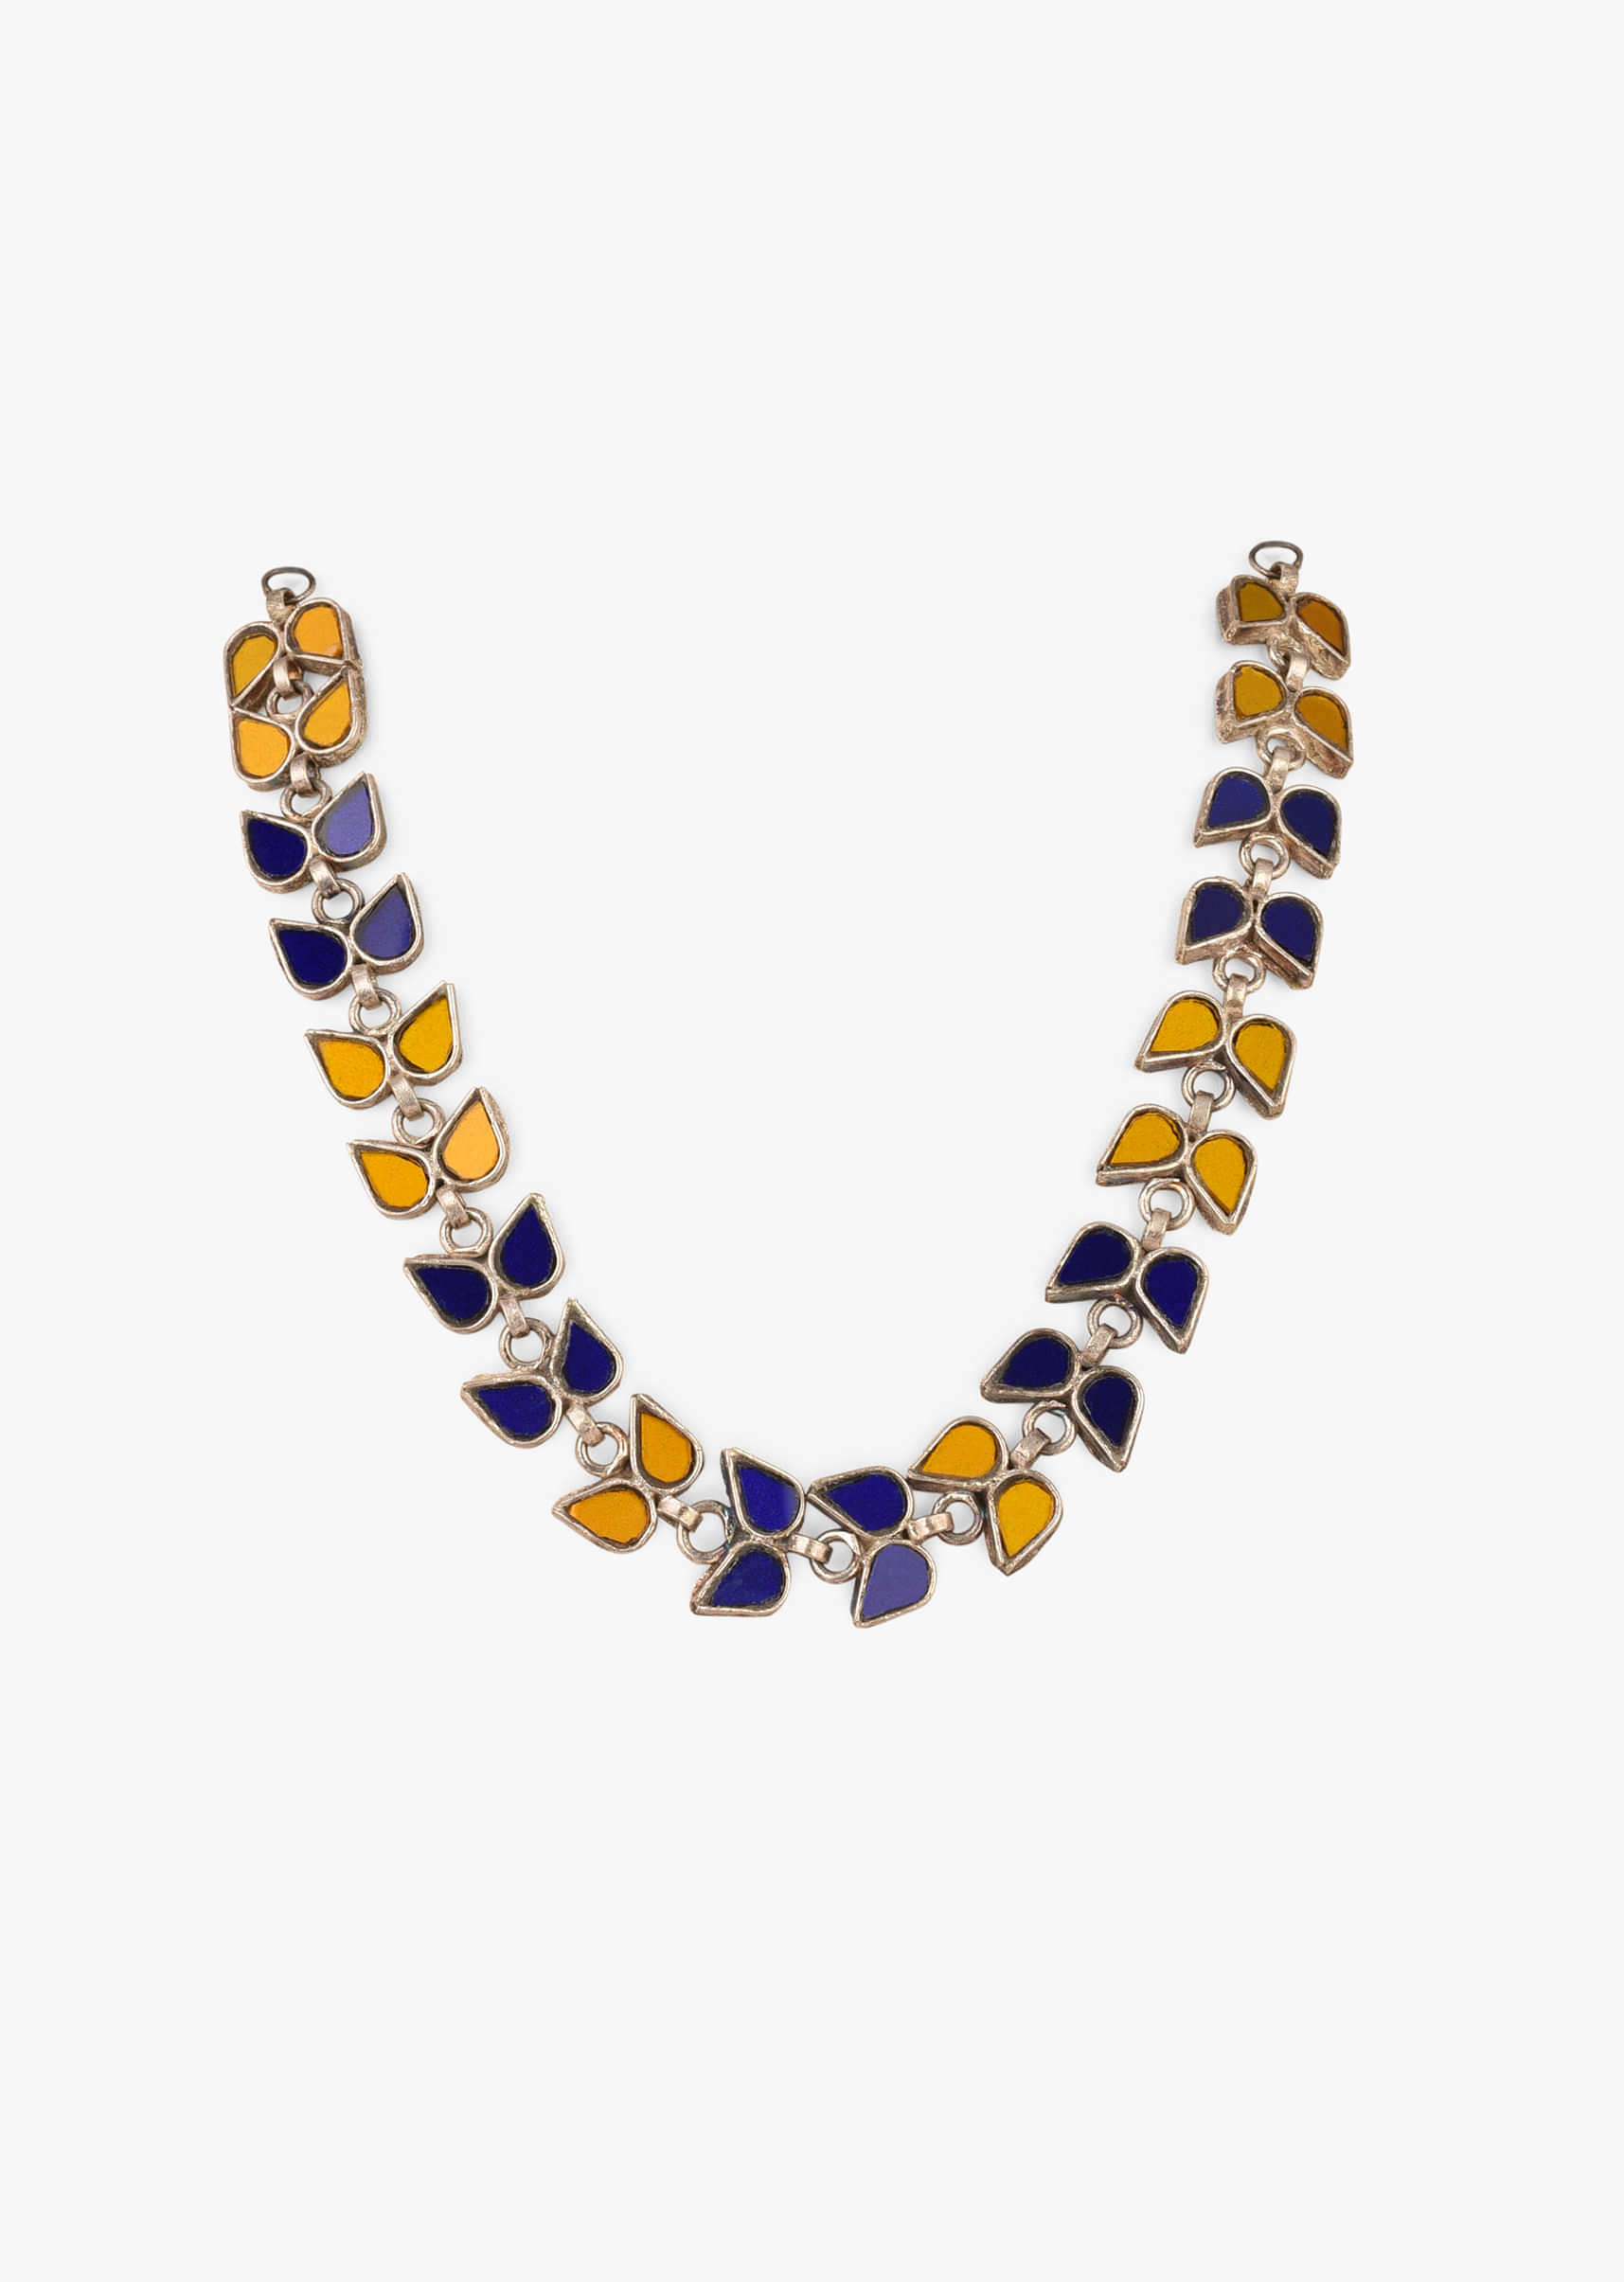 Silver Choker Necklace With Royal Blue Glass Embellished Four Petal Flowers 